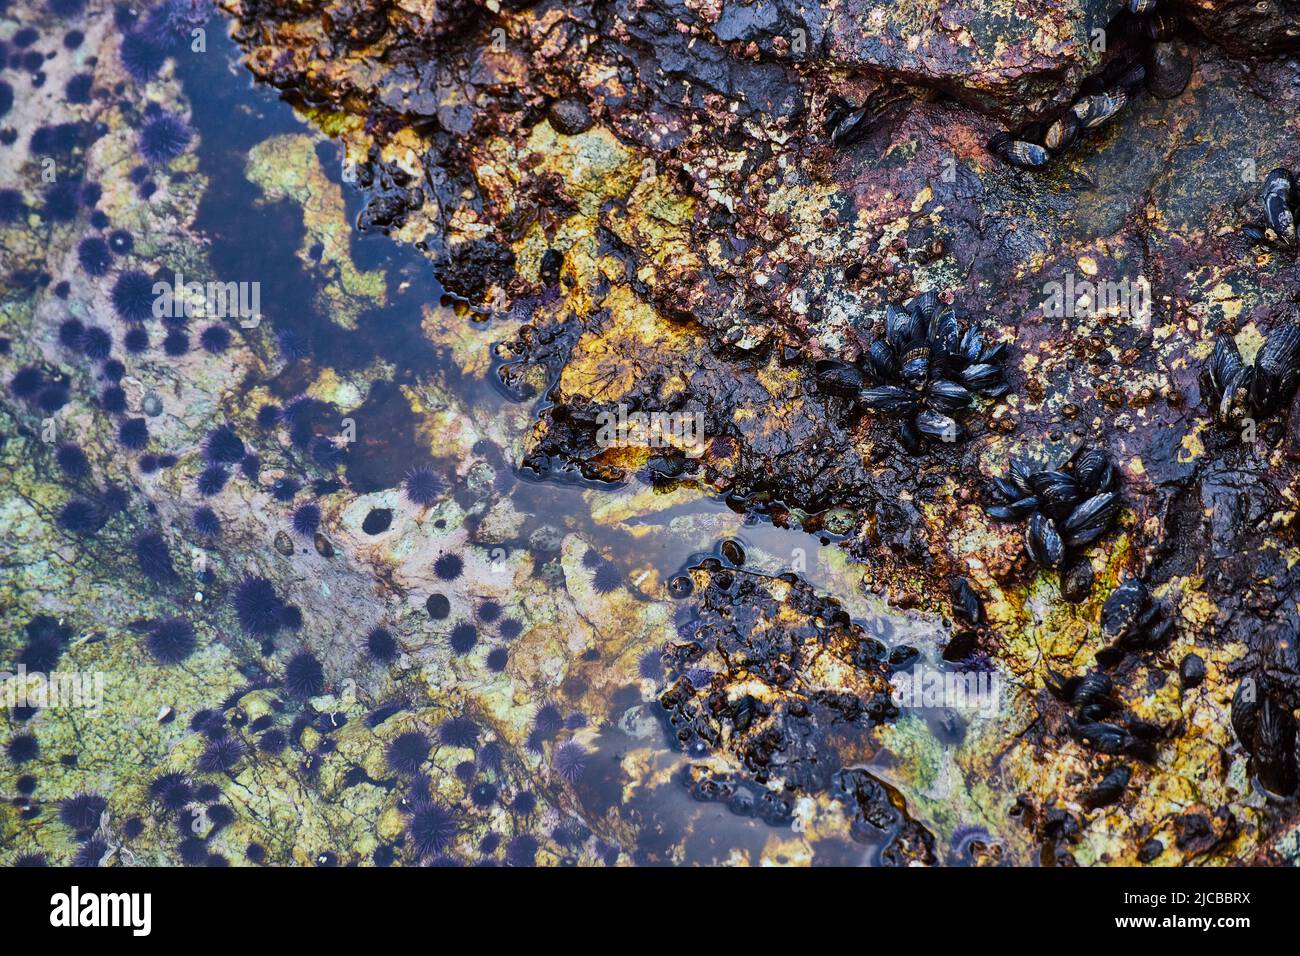 Tide pool on coast filled with mussels and anemone Stock Photo